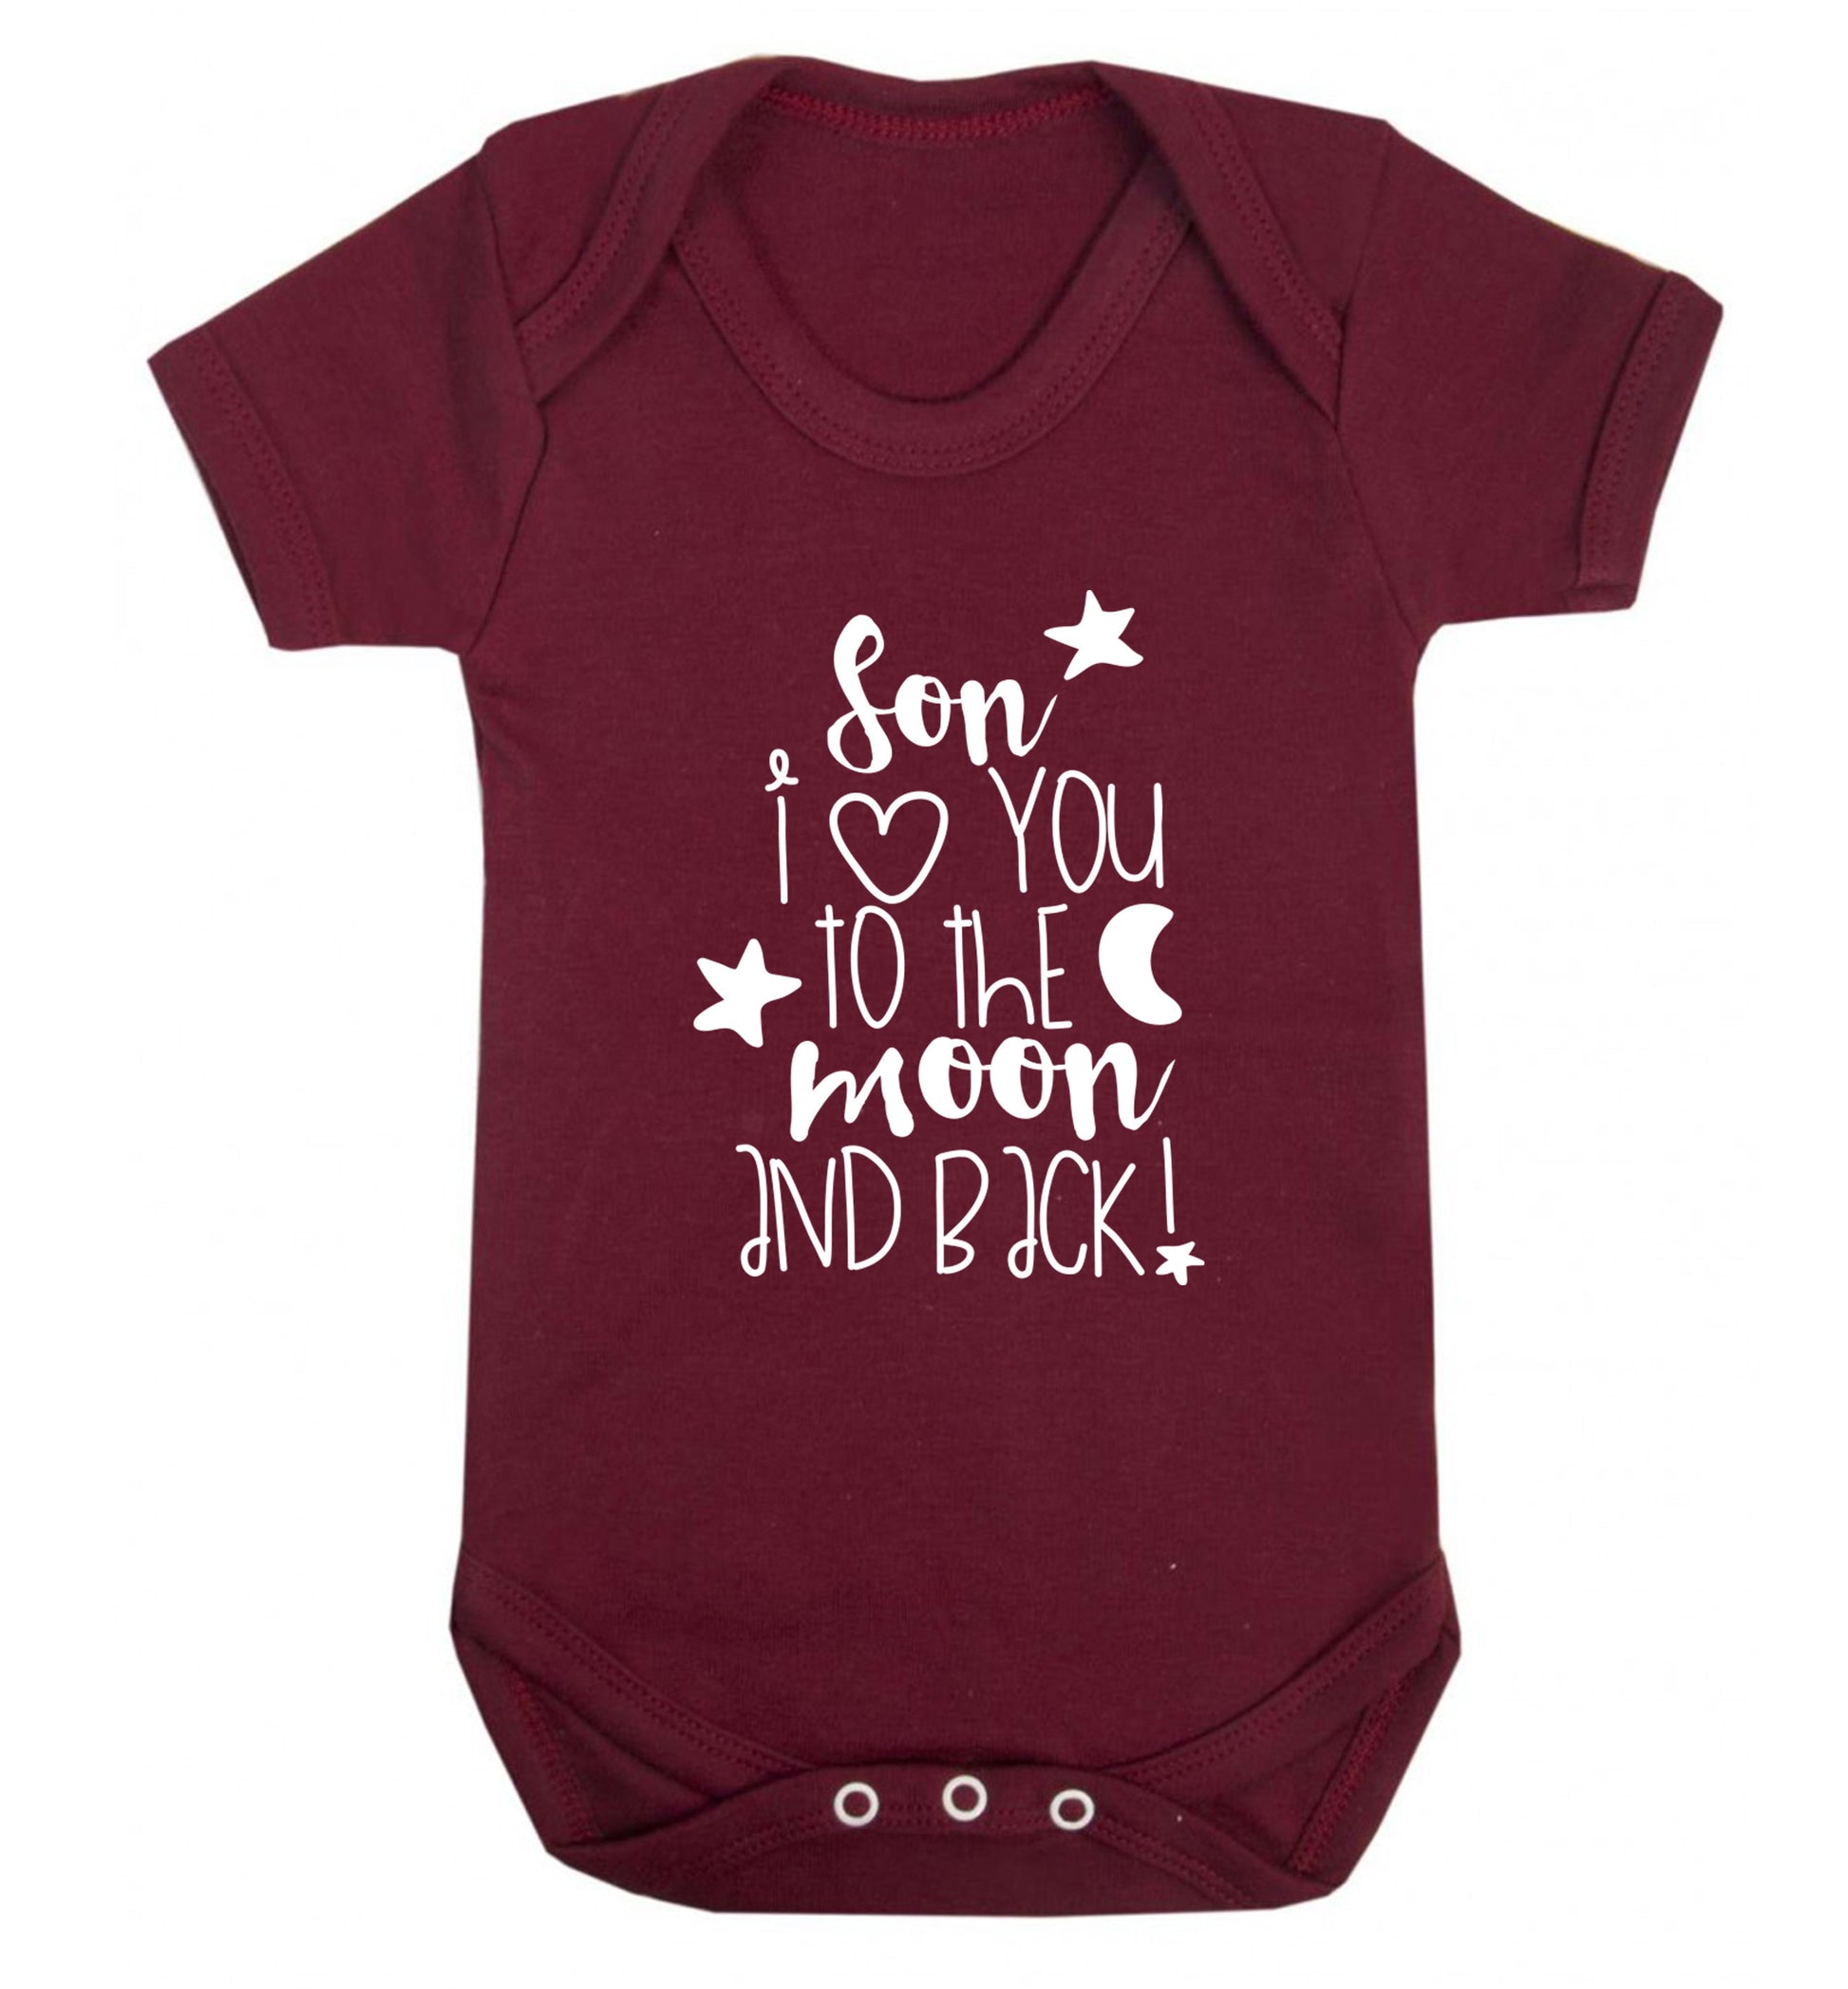 Son I love you to the moon and back Baby Vest maroon 18-24 months